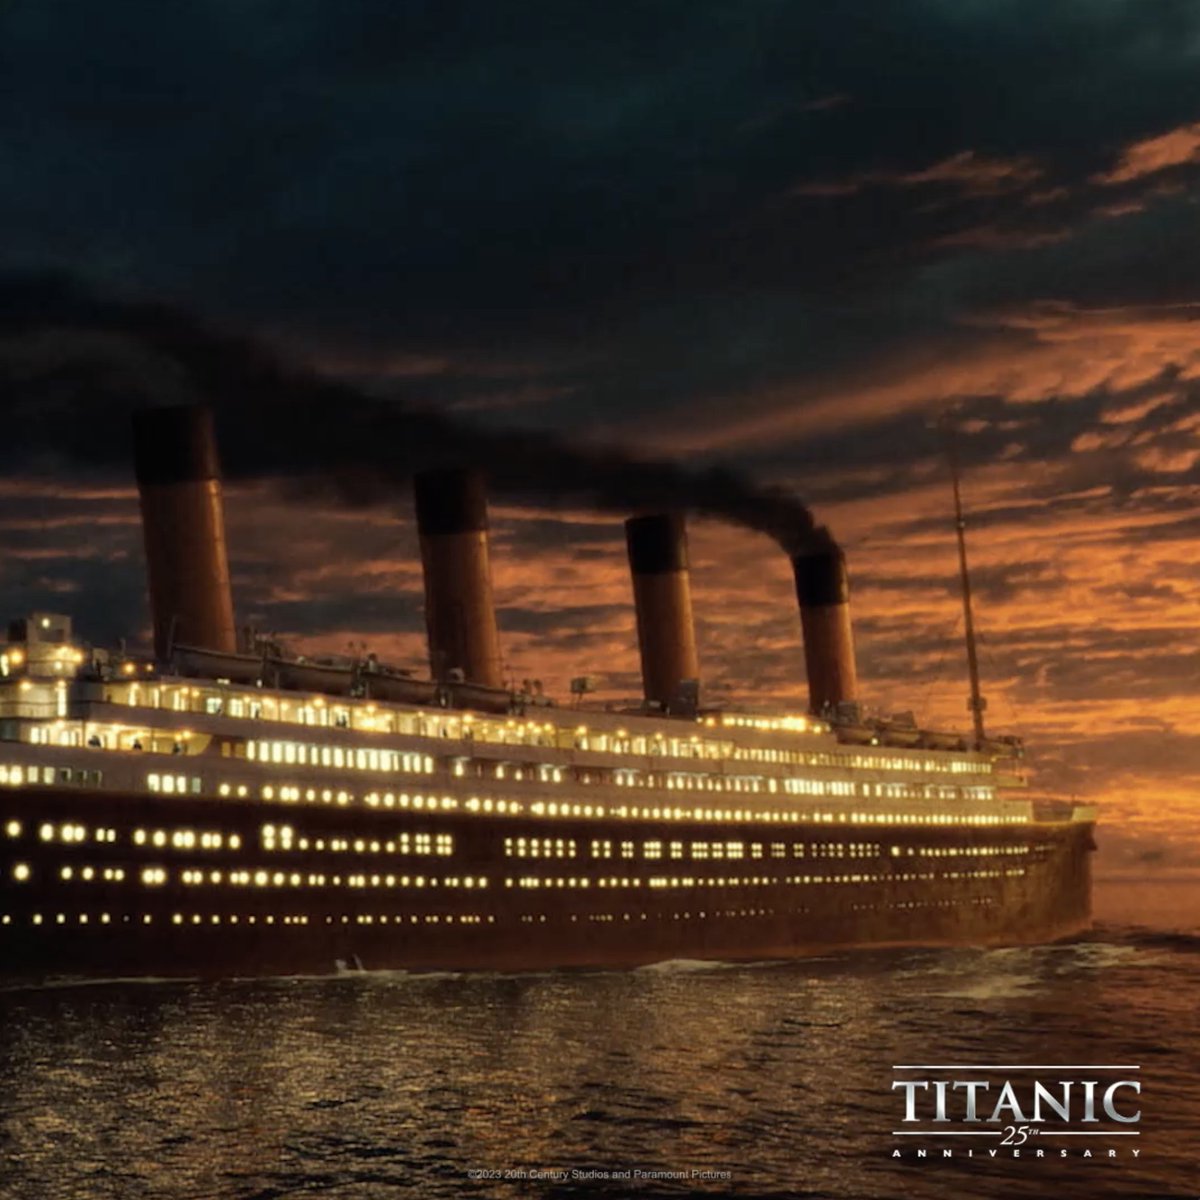 Titanic the ship of dreams. #Titanic is now playing in theatres for a limited time in 4K 3D